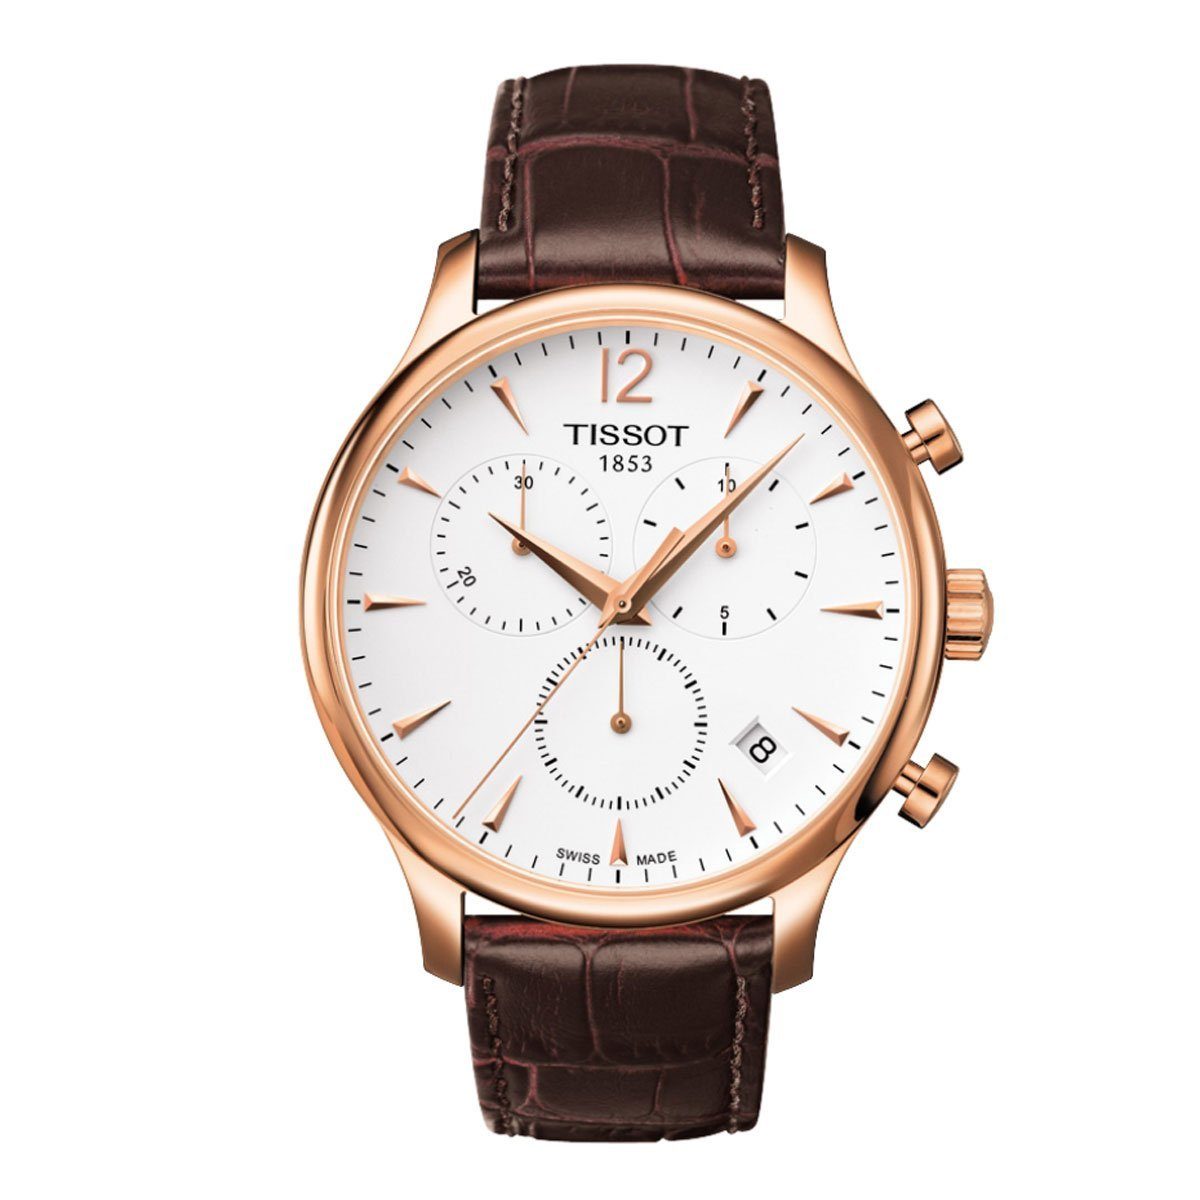 TISSOT TRADITION CHRONOGRAPH BROWN 20MM LEATHER BAND image